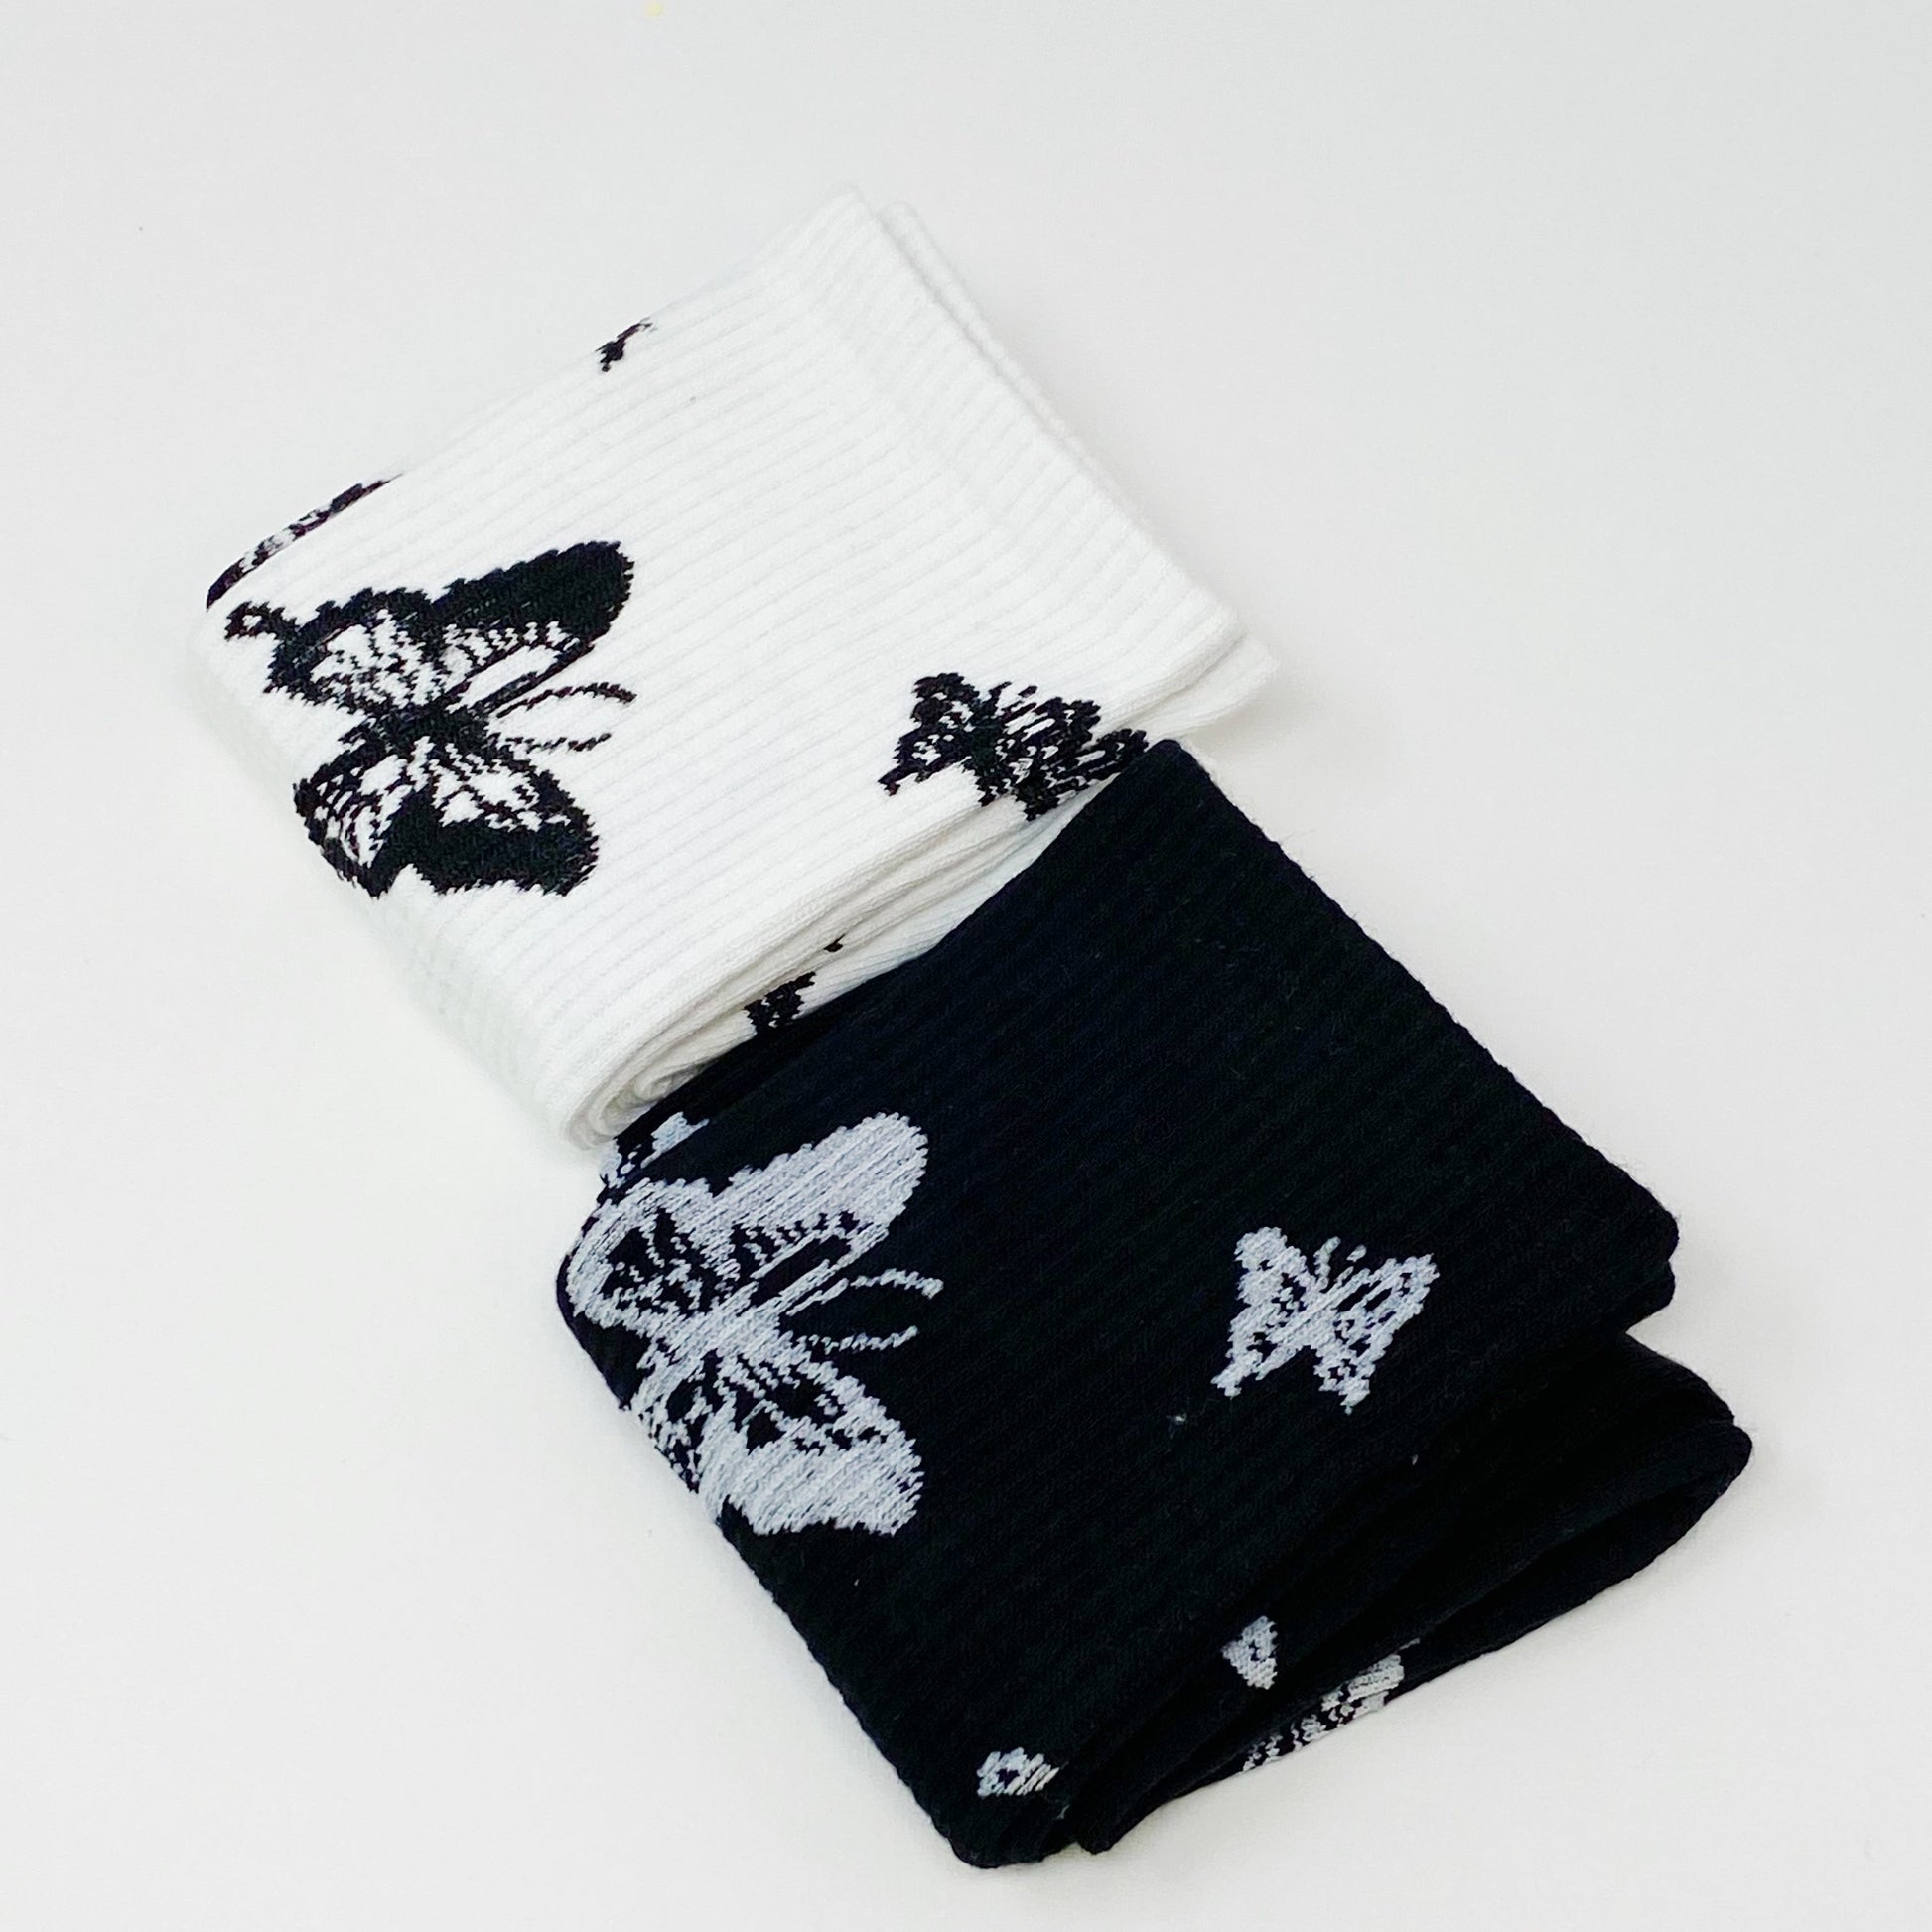 Butterfly In The Air Socks Set - Scarvesnthangs